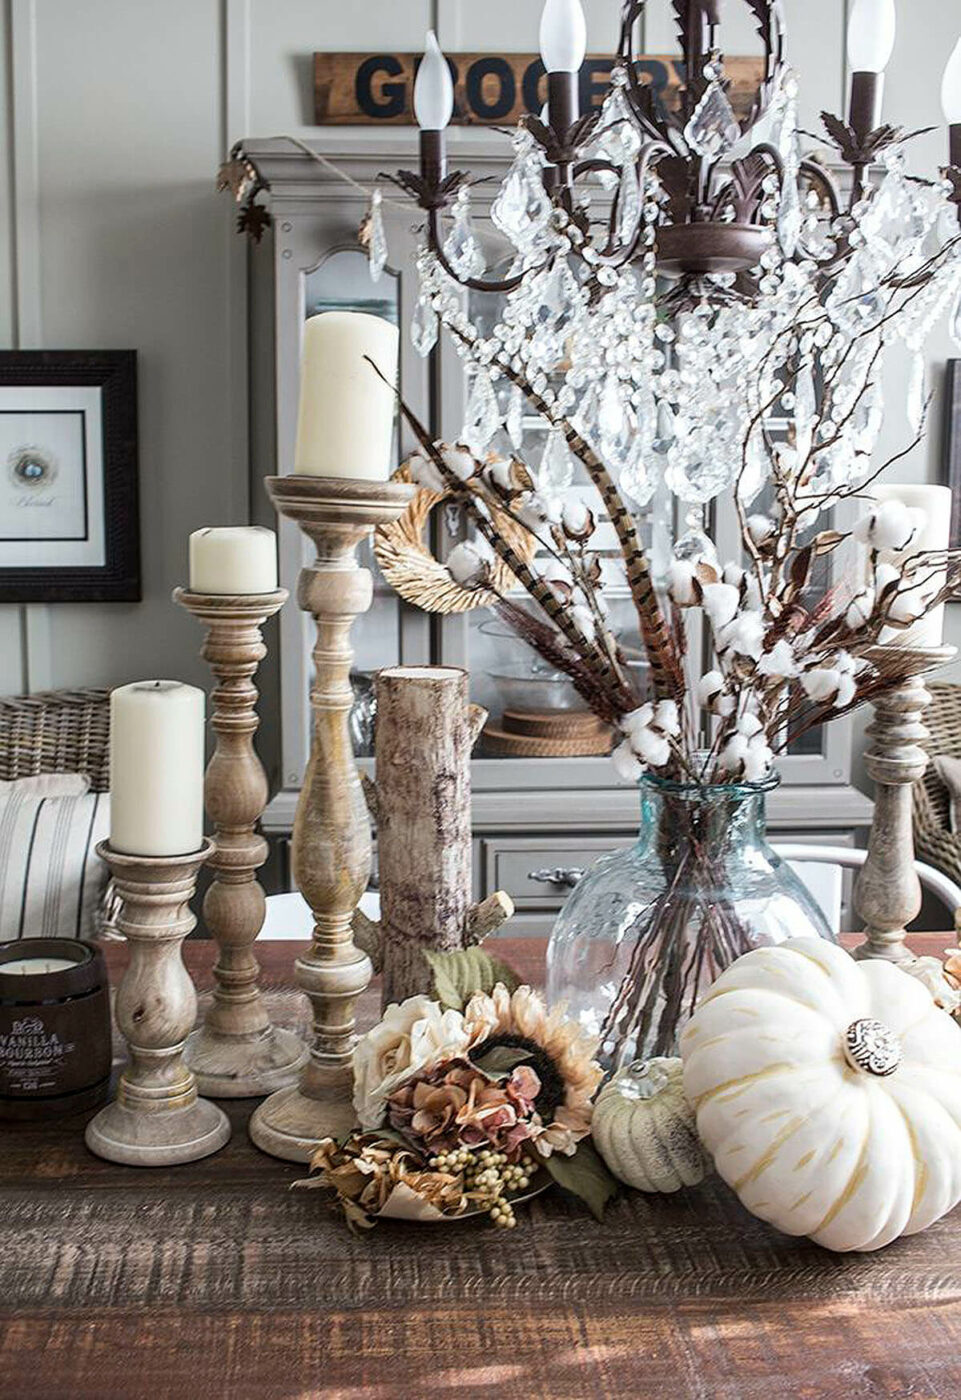 A Stunningly Sophisticated Harvest Centerpiece